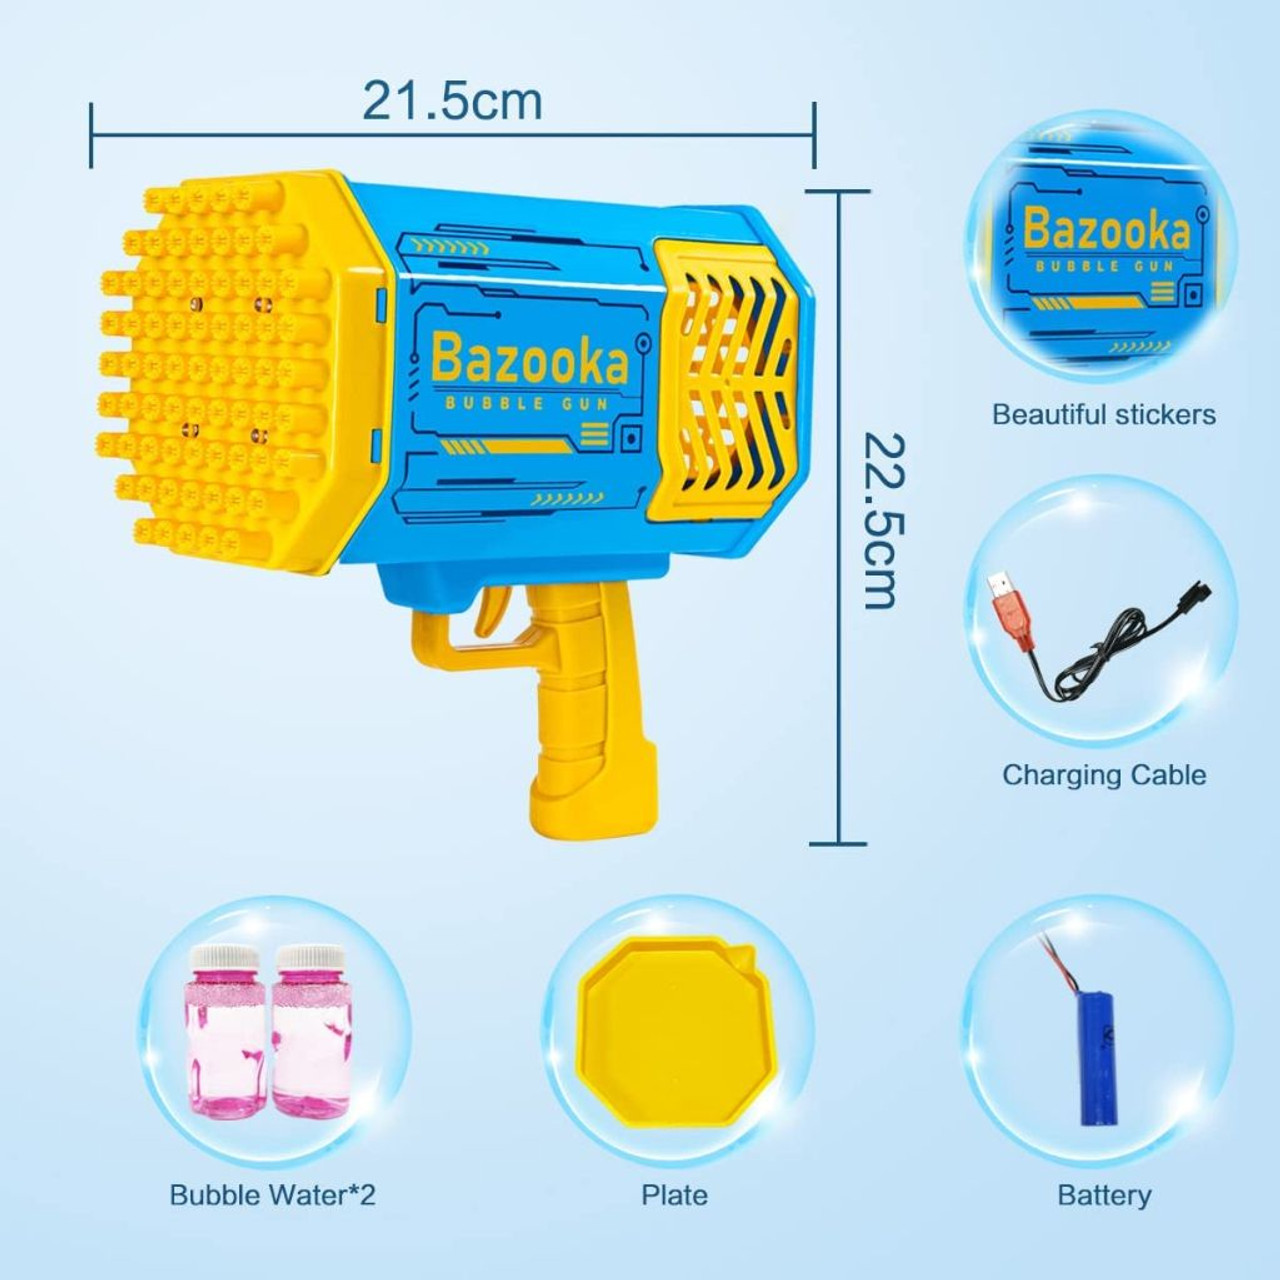 Bazooka Bubble Machine with Rechargeable Battery and Bubble Solution product image